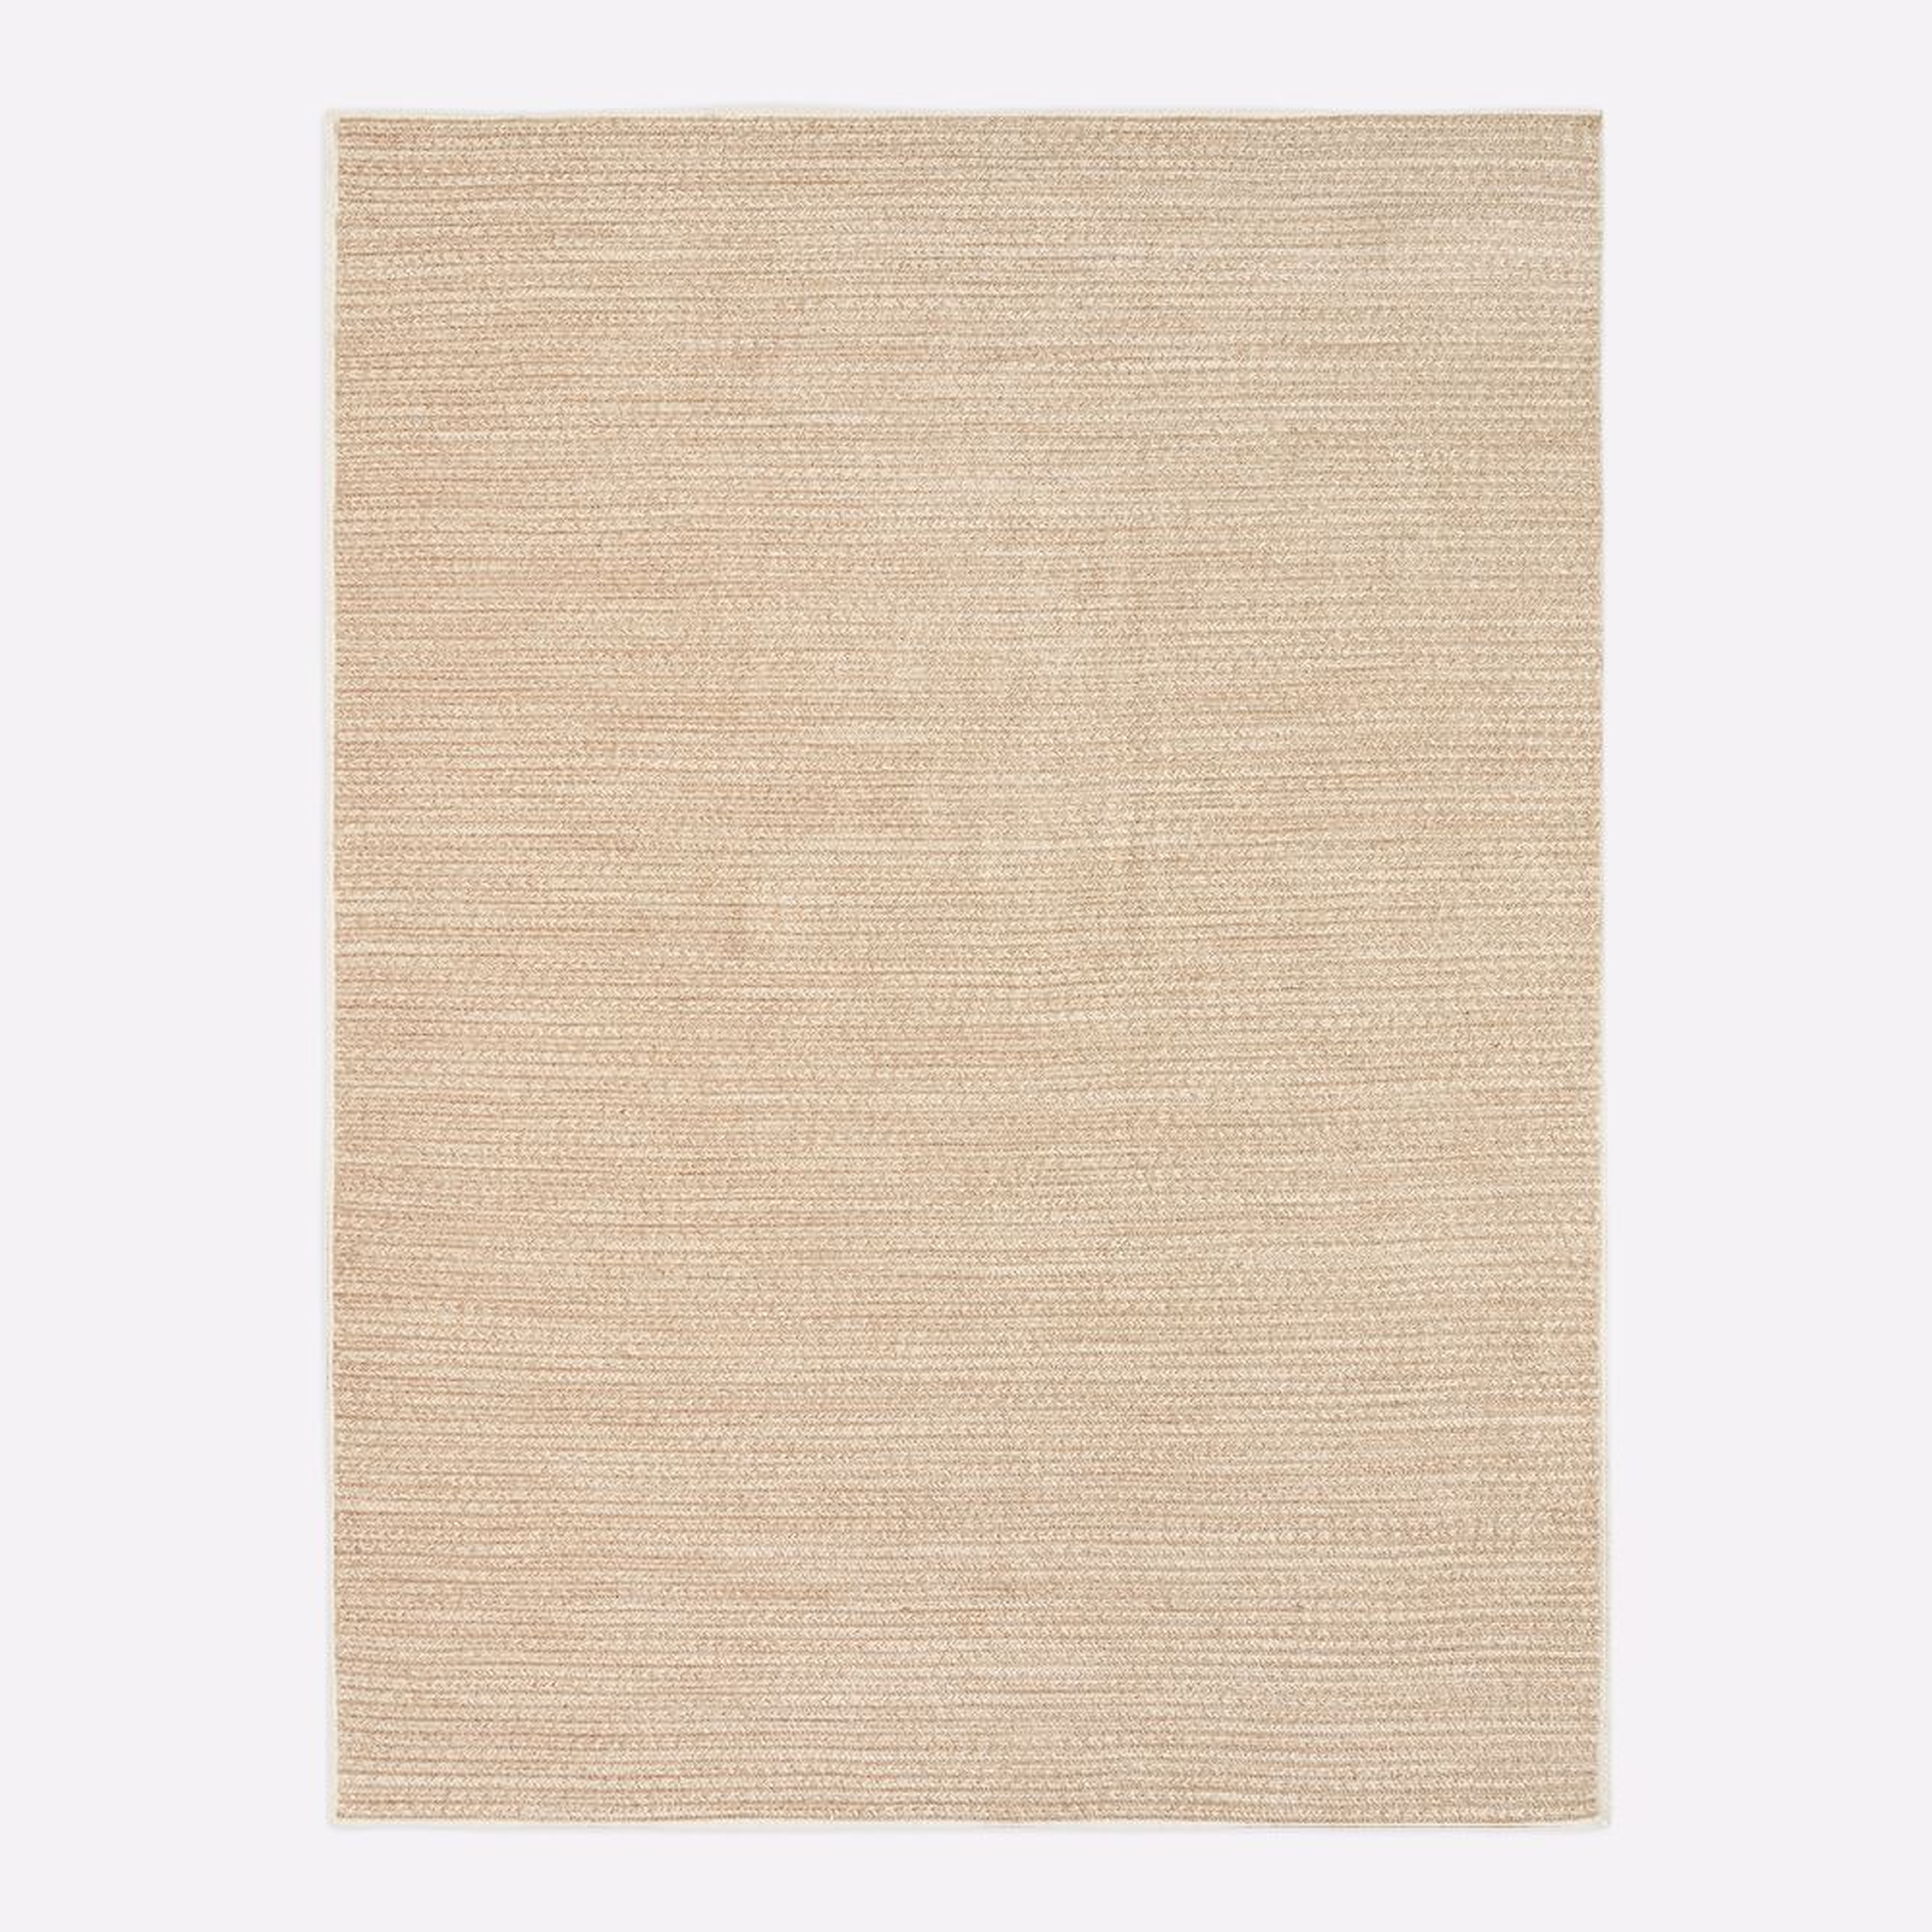 Woven Cable All Weather Rug, 9x12, Natural - West Elm